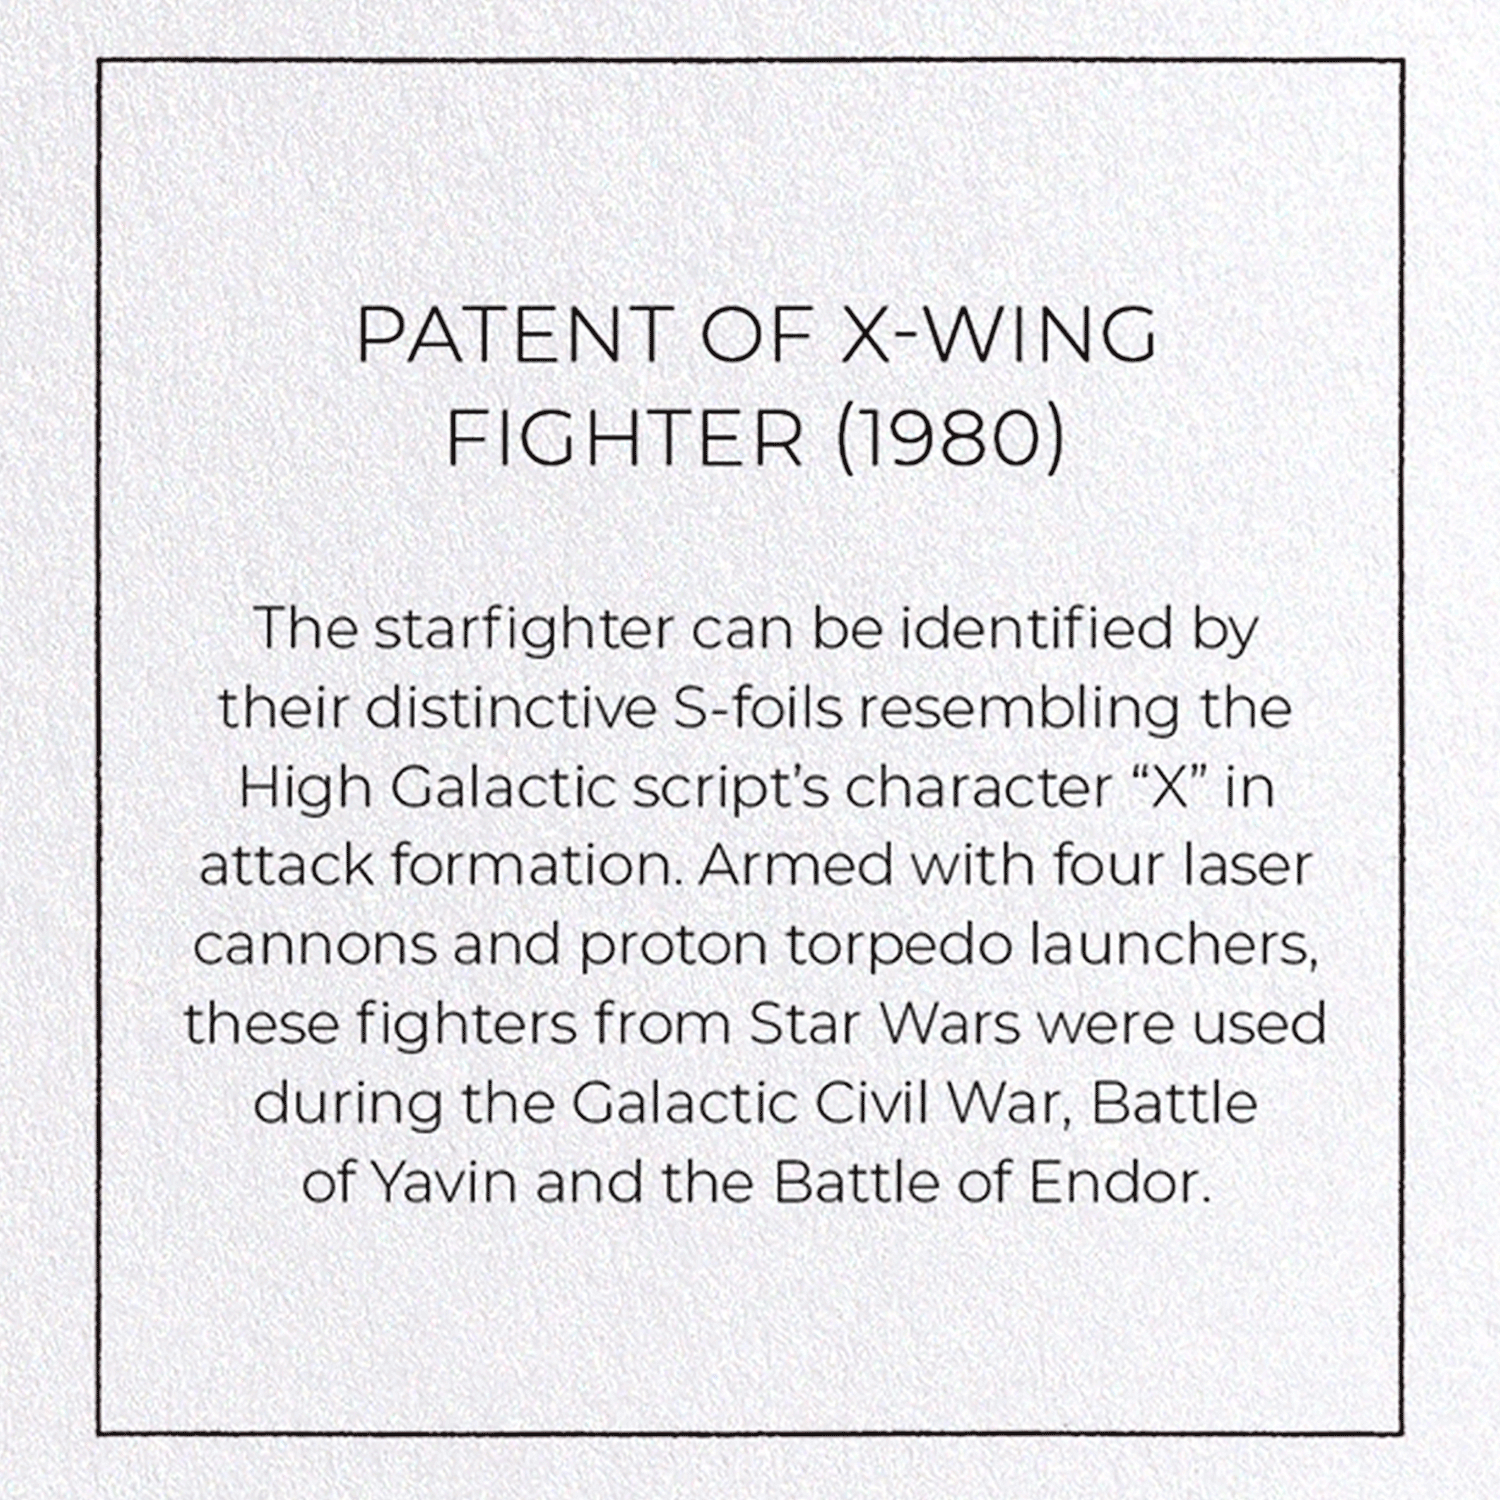 PATENT OF X-WING FIGHTER (1980)